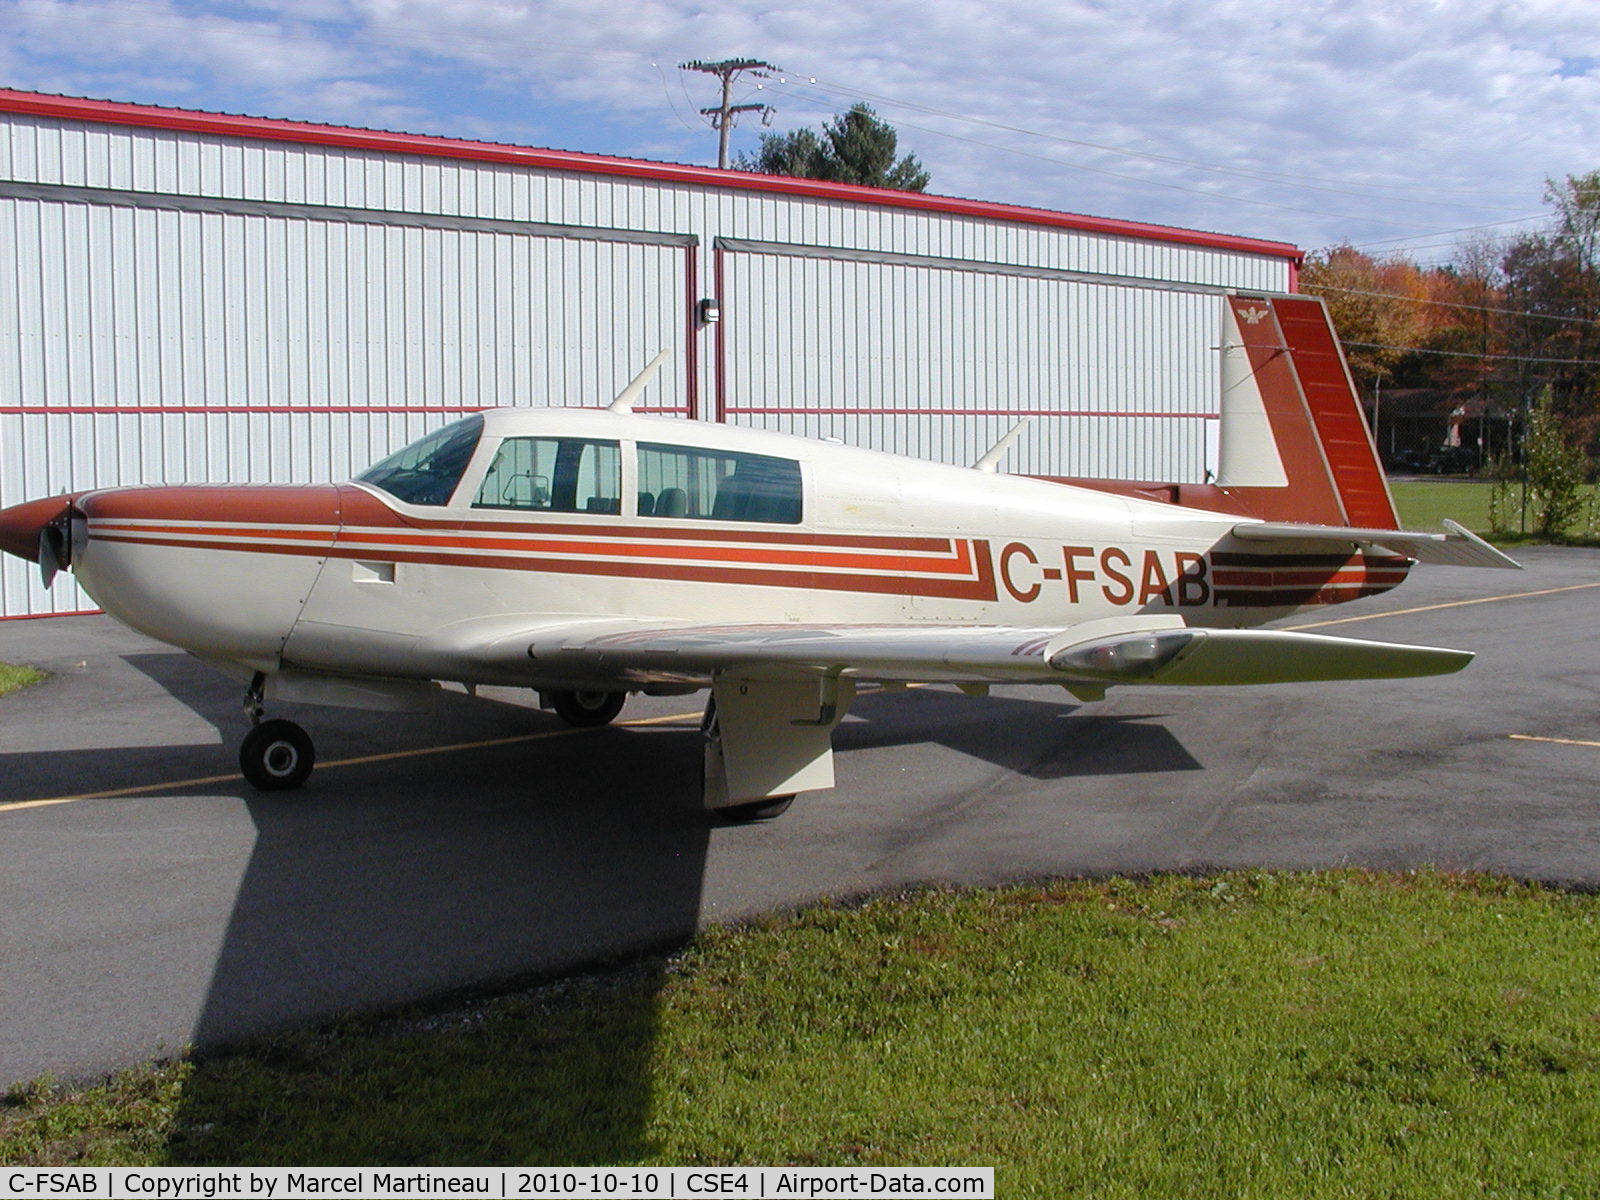 C-FSAB, 1983 Mooney M20K C/N 25-0757, The aircraft was converted to a 252 MOD.